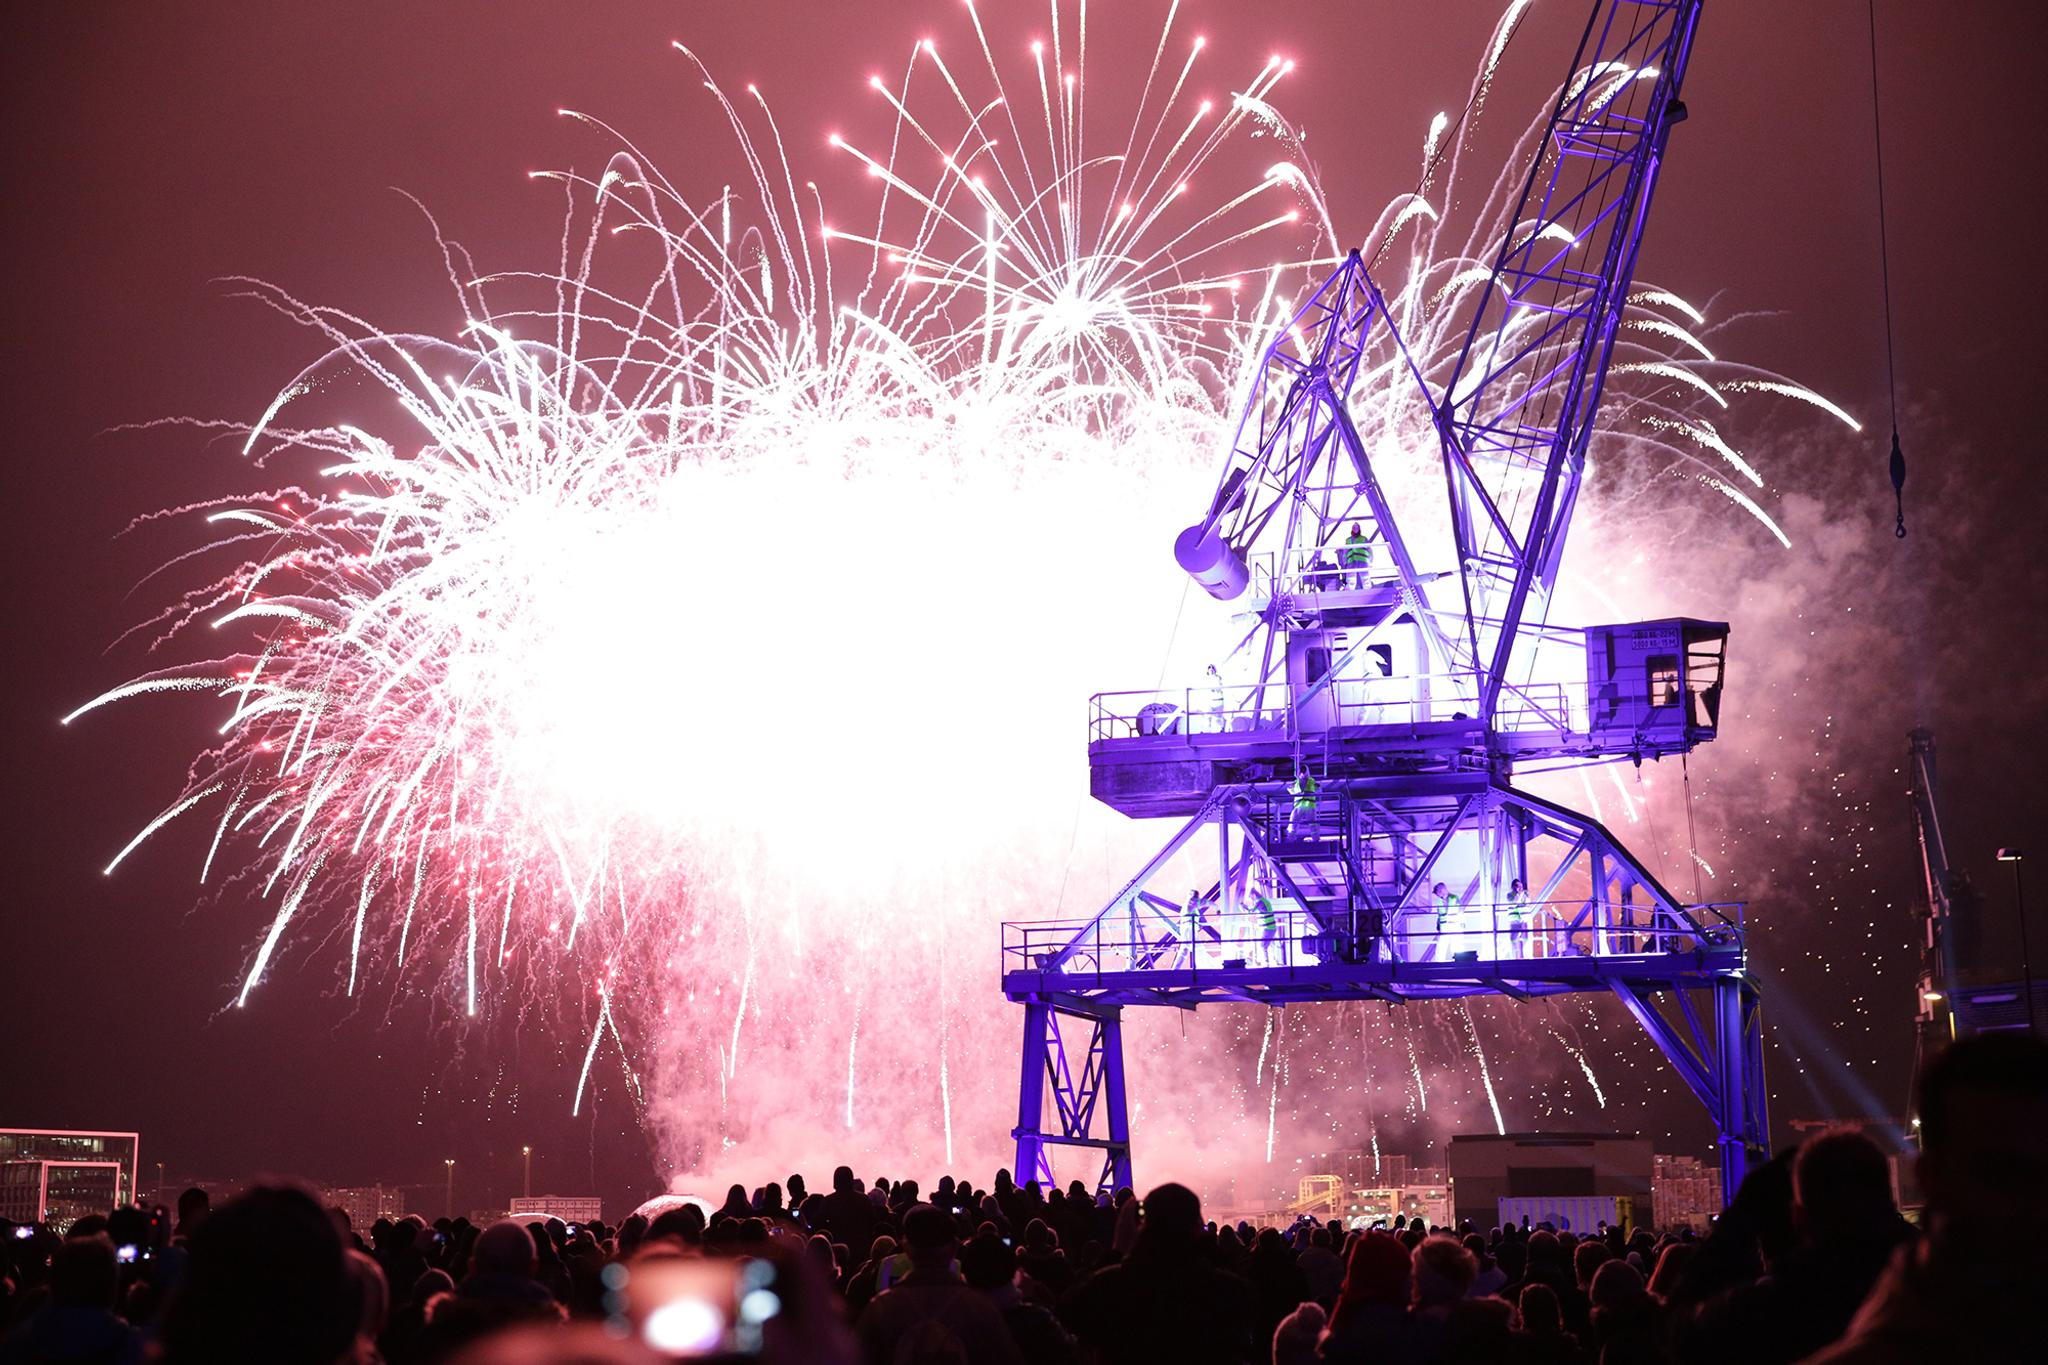 Big bursts of fireworks in front of a purple-lit crane. A crowd watches on.